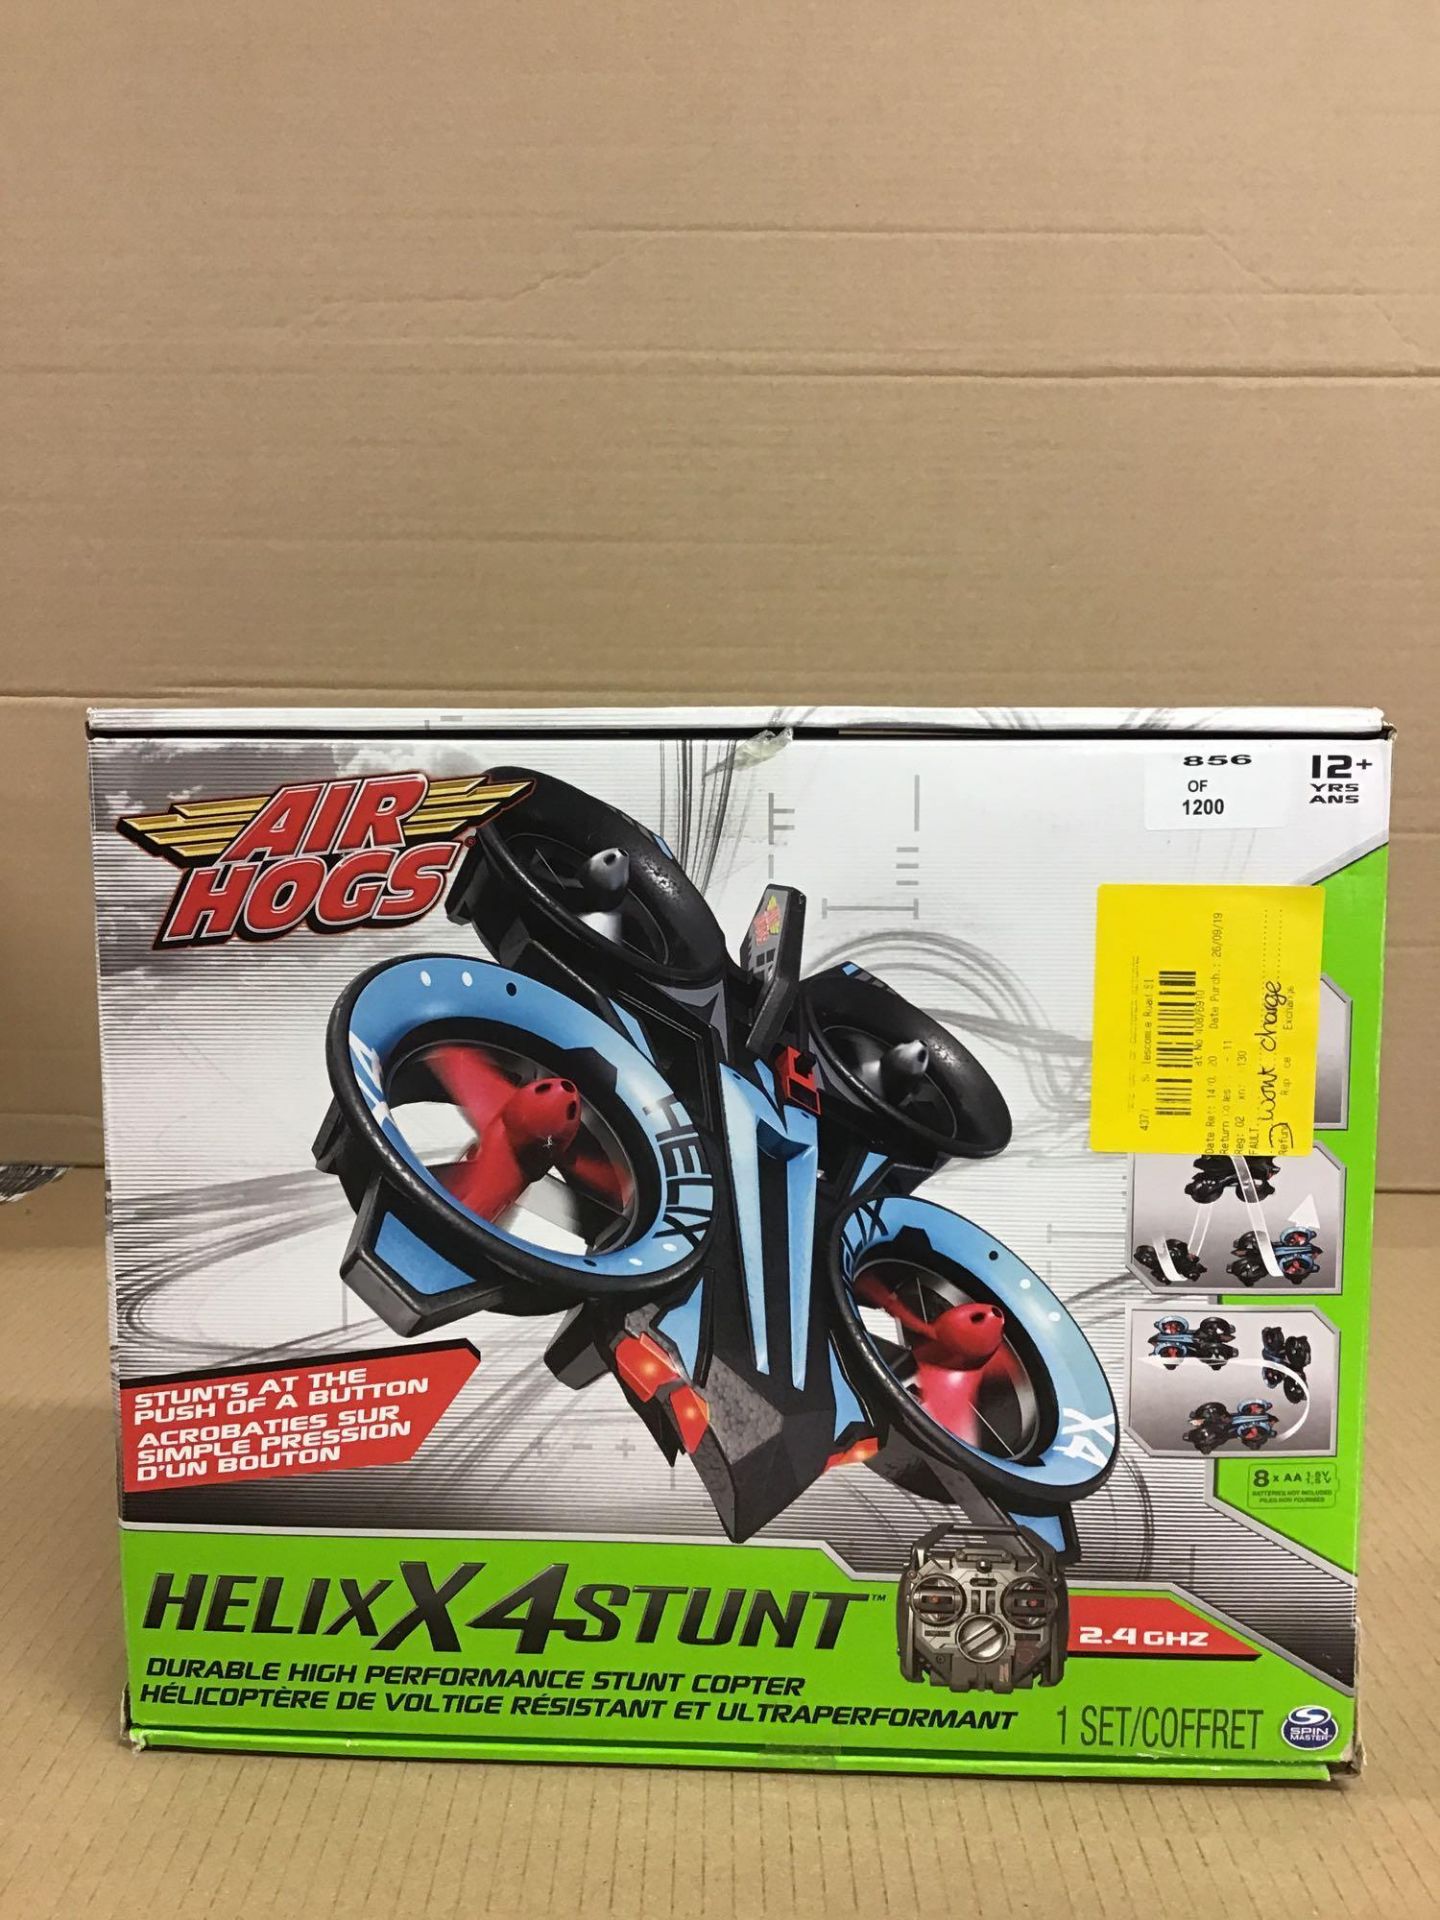 Air Hogs RC Helix X4 Stunt 2.4 GHz Quadcopter, Blue/Red - £19.99 RRP - Image 2 of 5